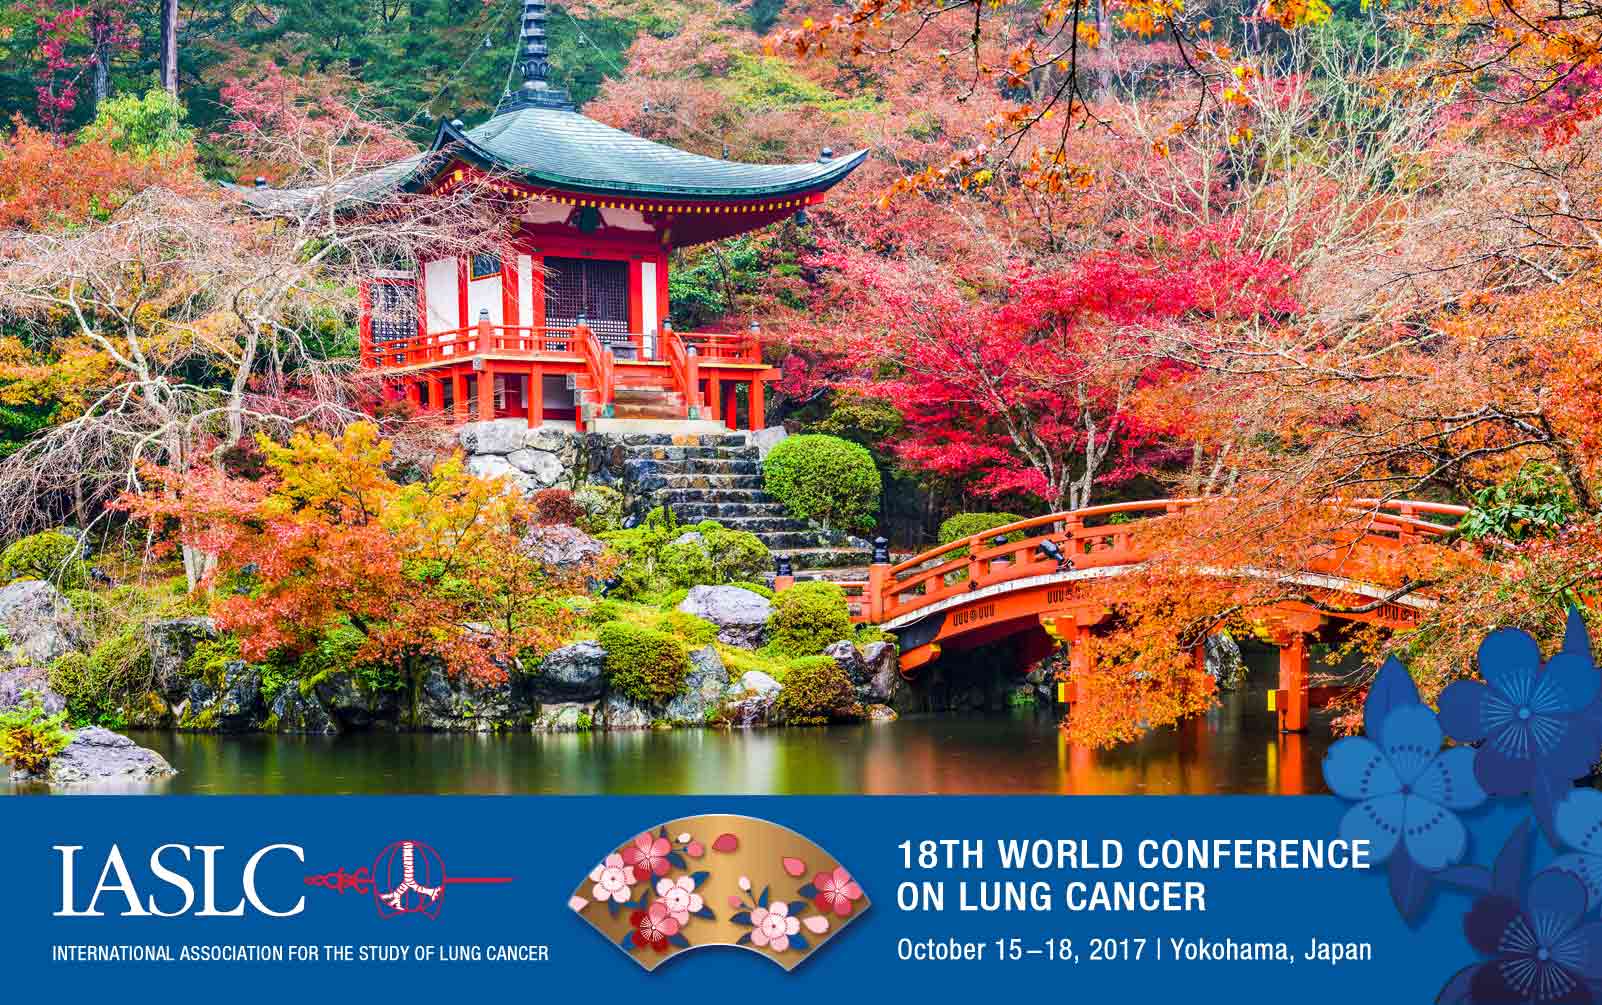 IASLC 18th World Conference on Lung Cancer